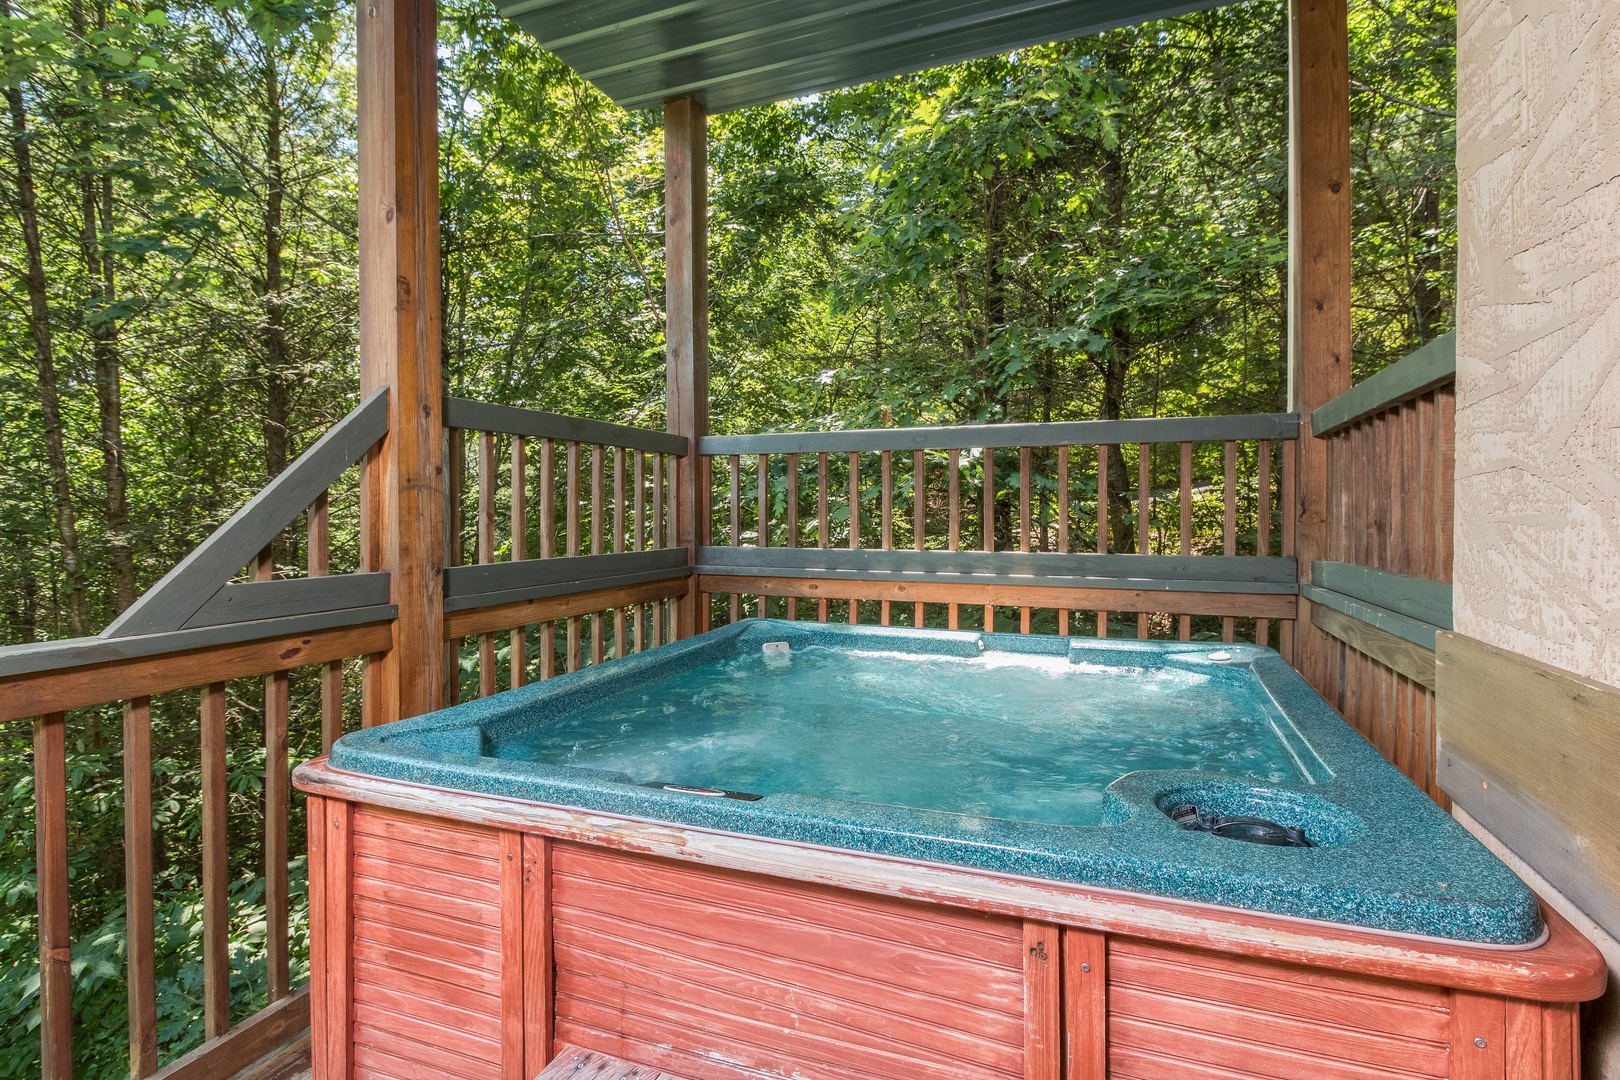 Hot tub on a covered deck at Stones Throw, a 4 bedroom cabin rental located in Pigeon Forge